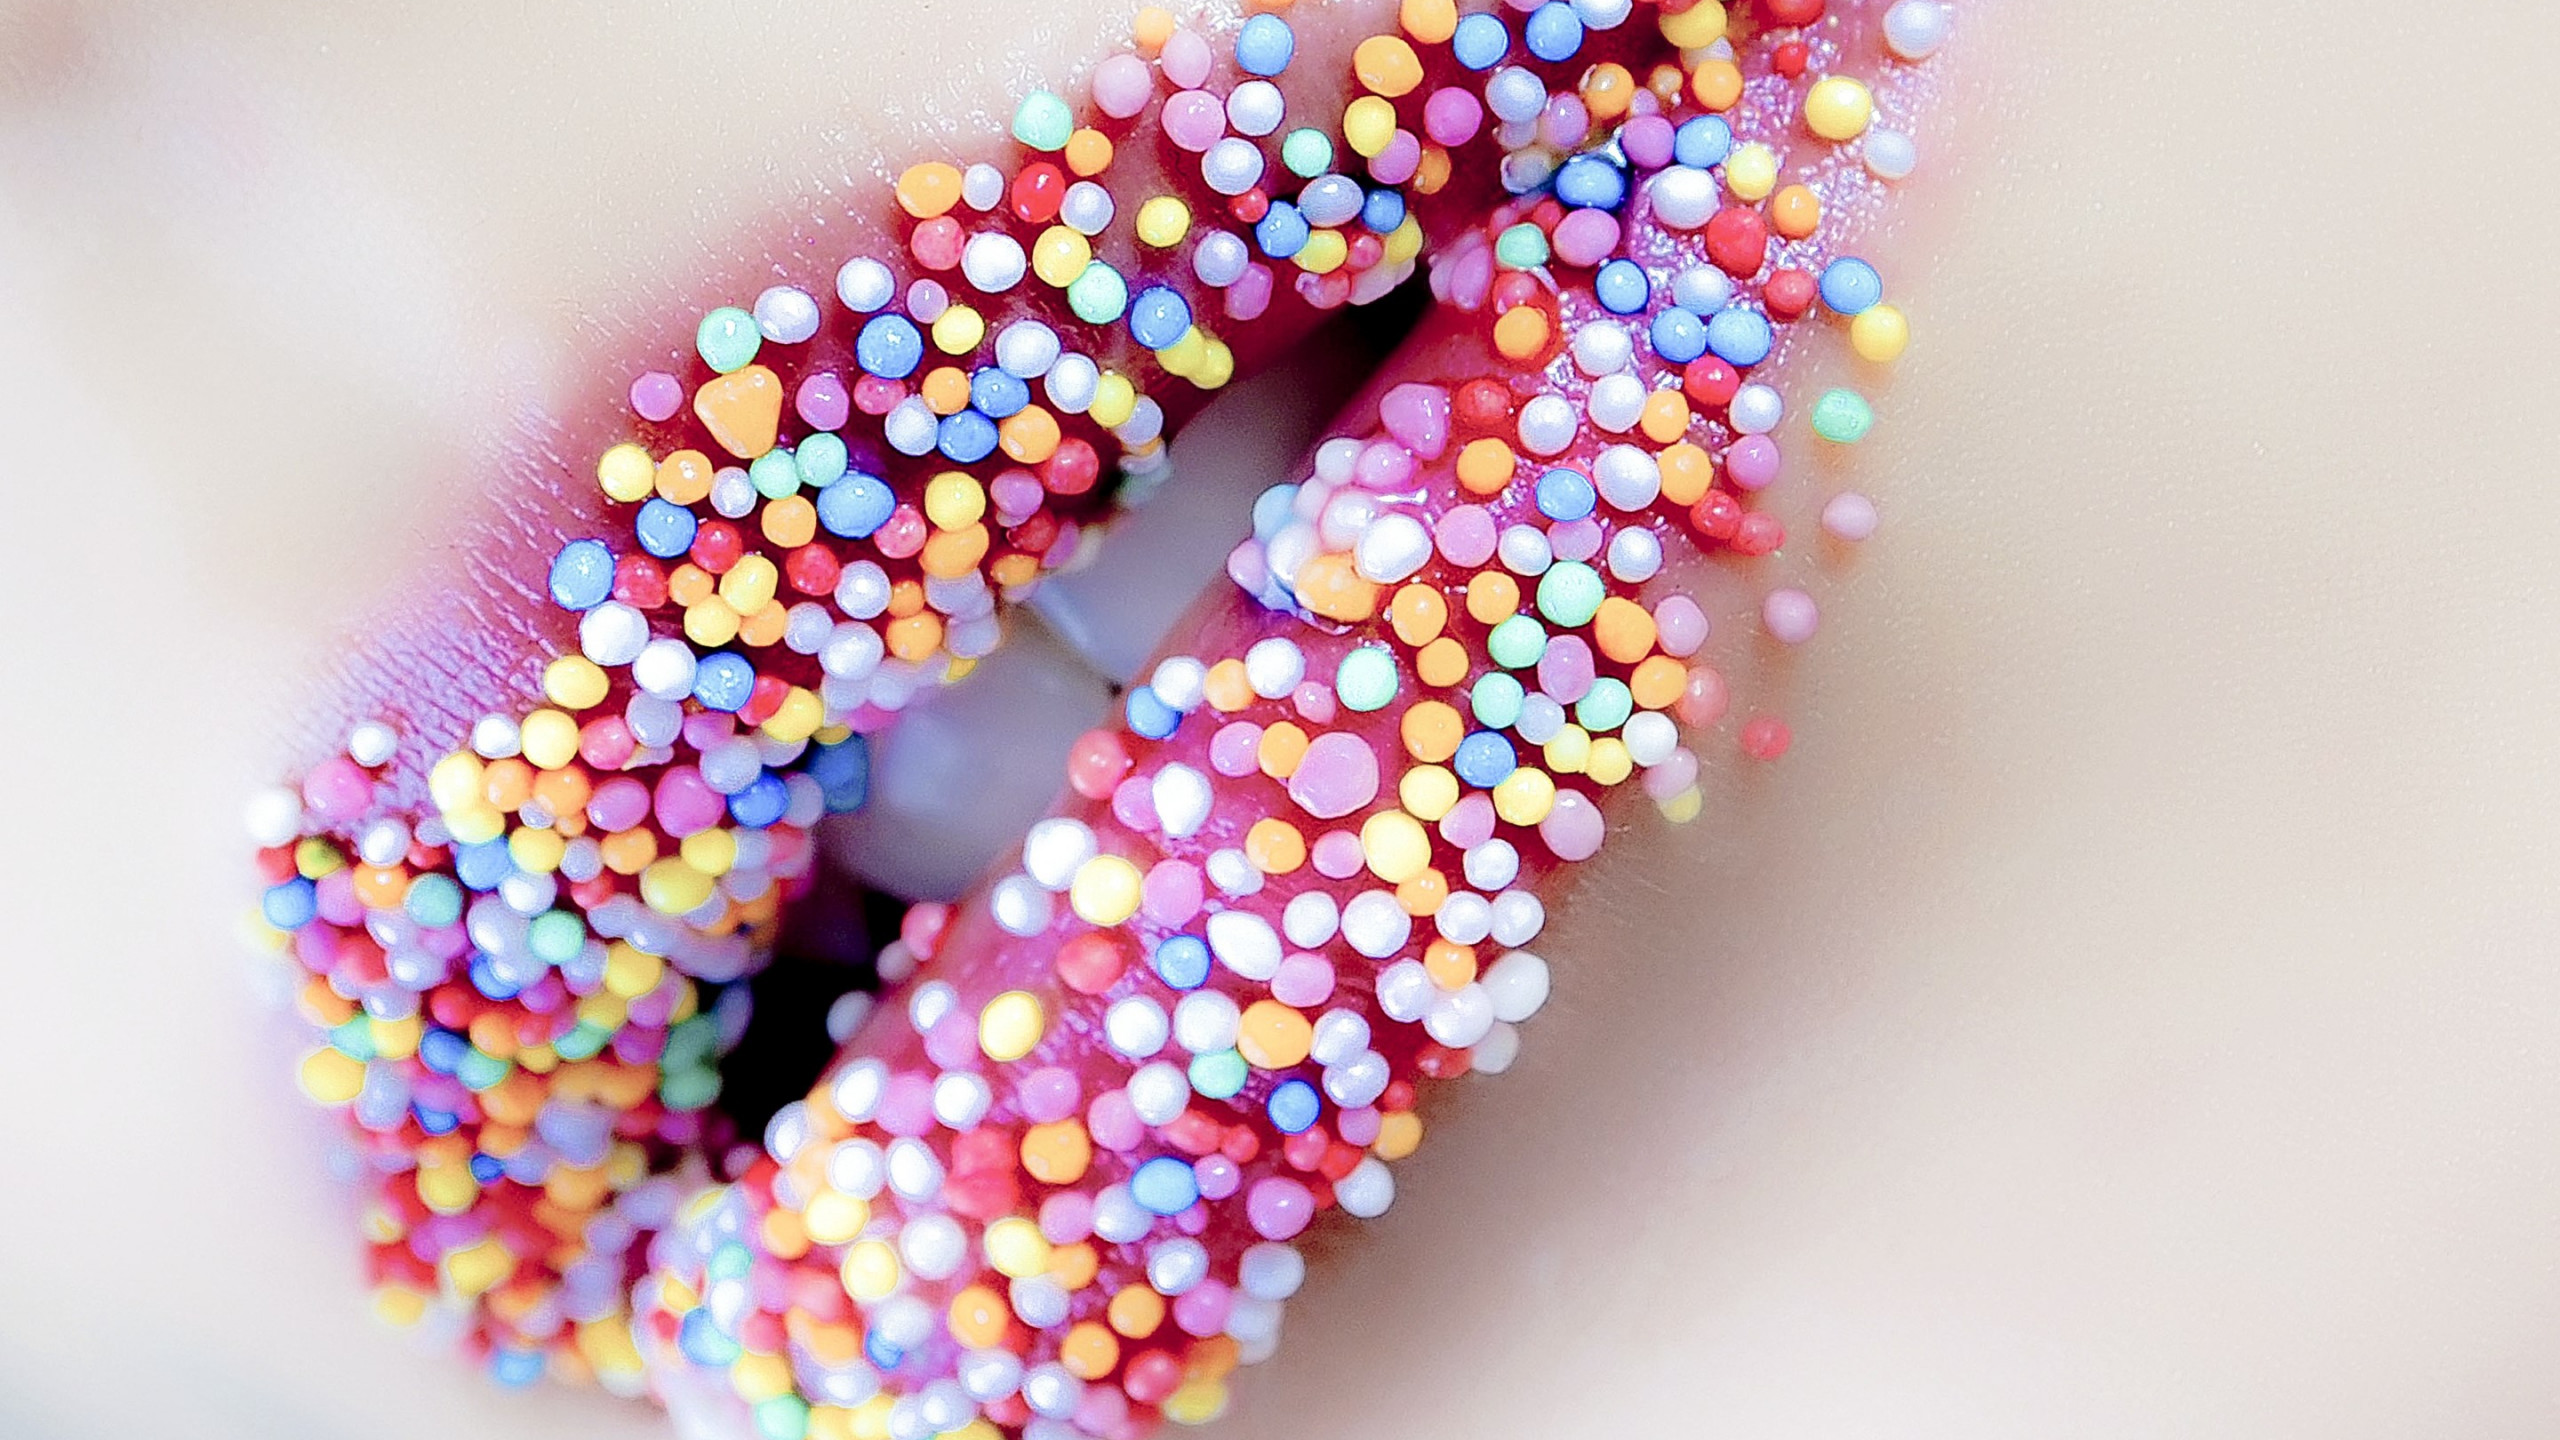 Lips with sweets wallpaper 2560x1440